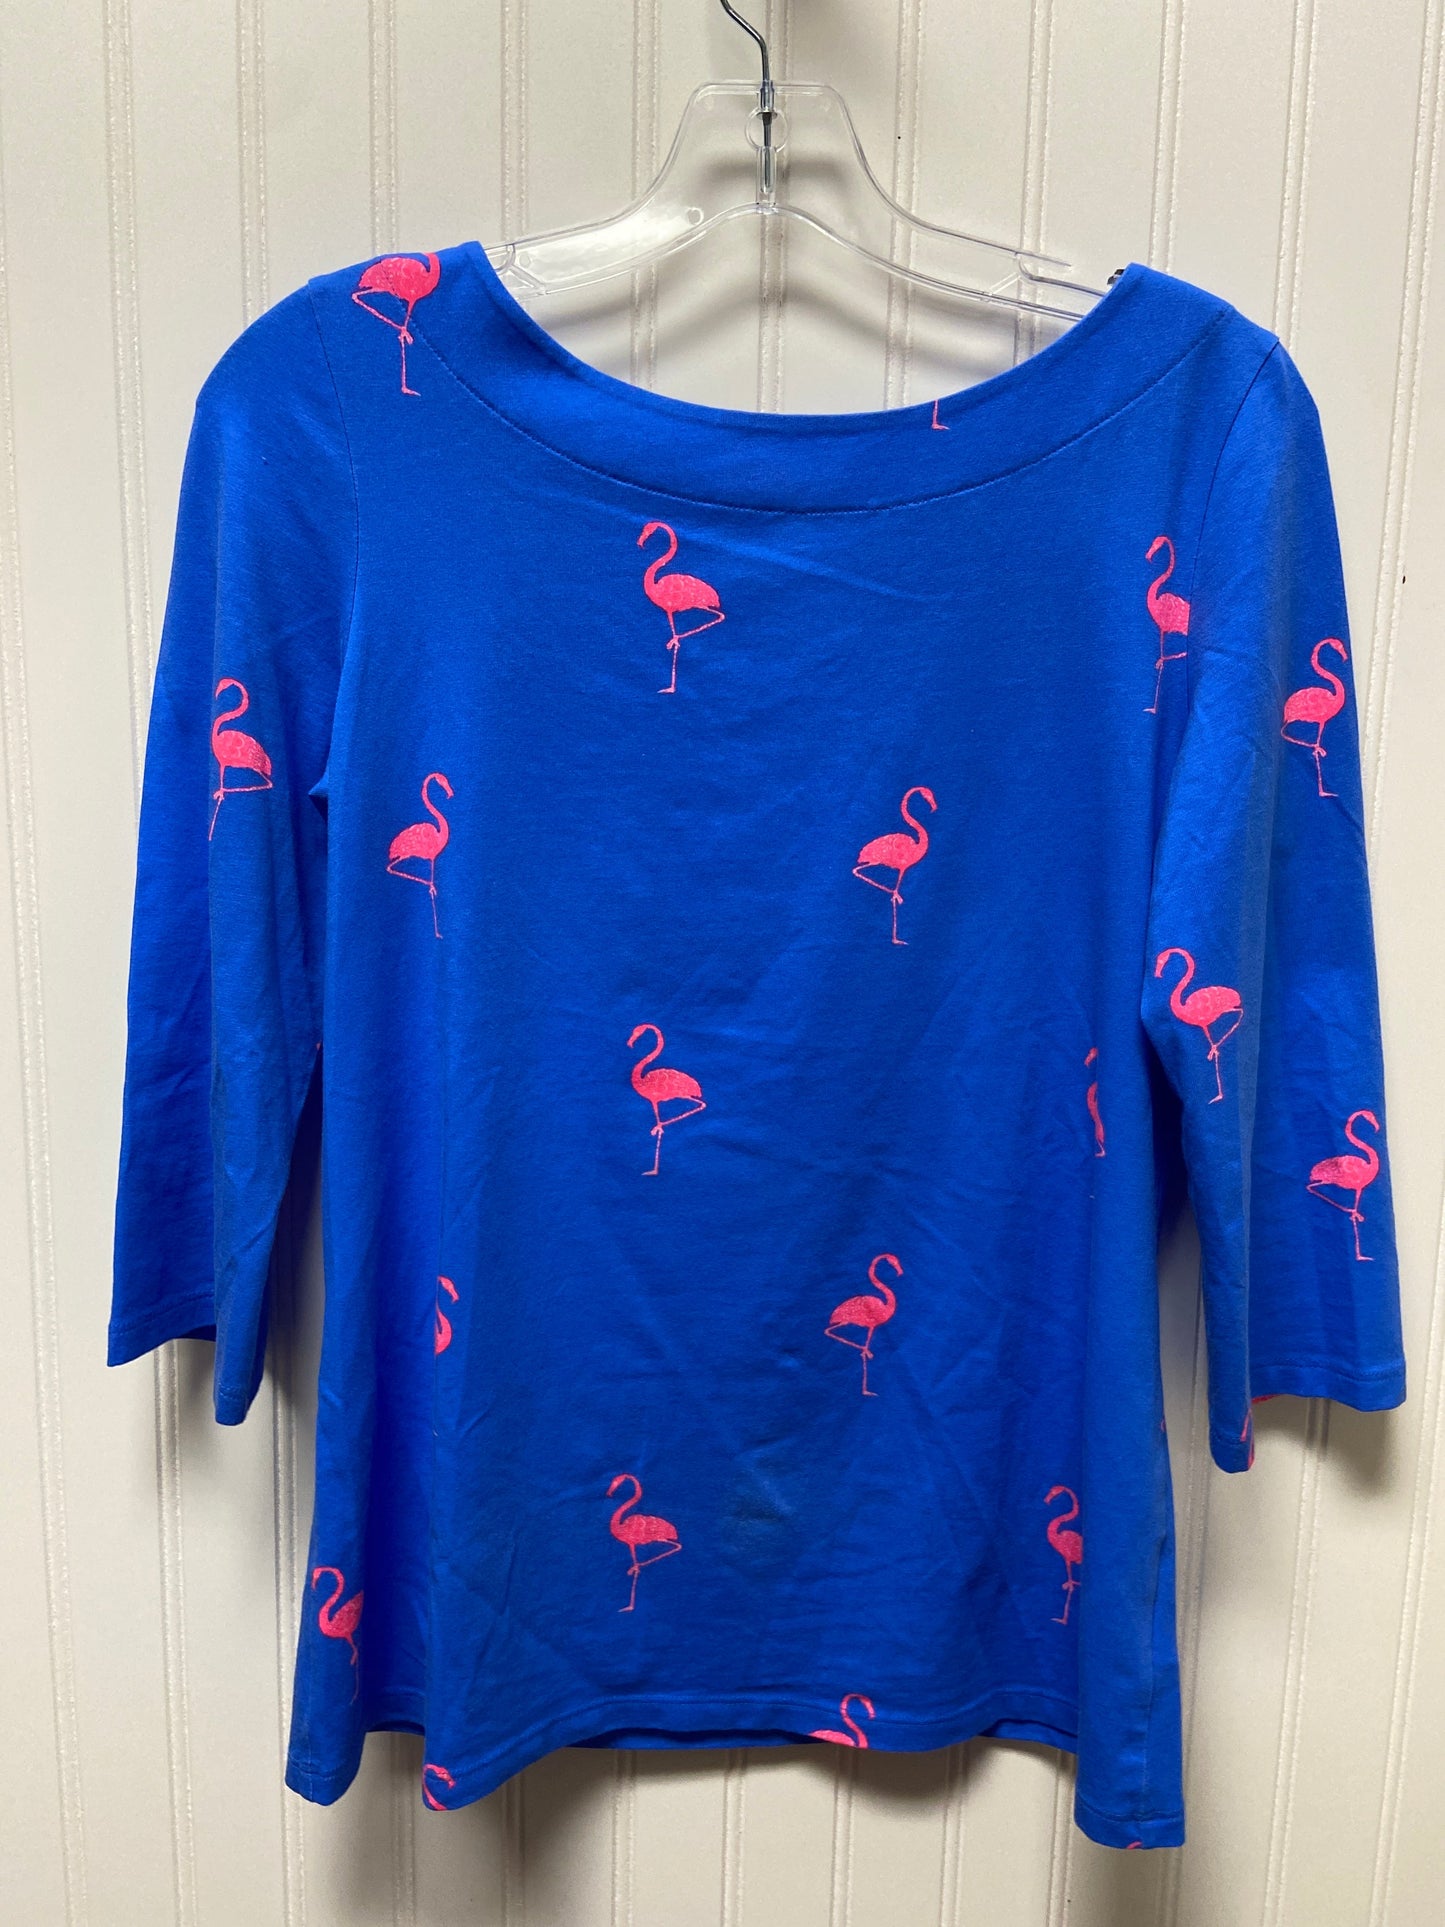 Blue Top Long Sleeve Designer Lilly Pulitzer, Size S